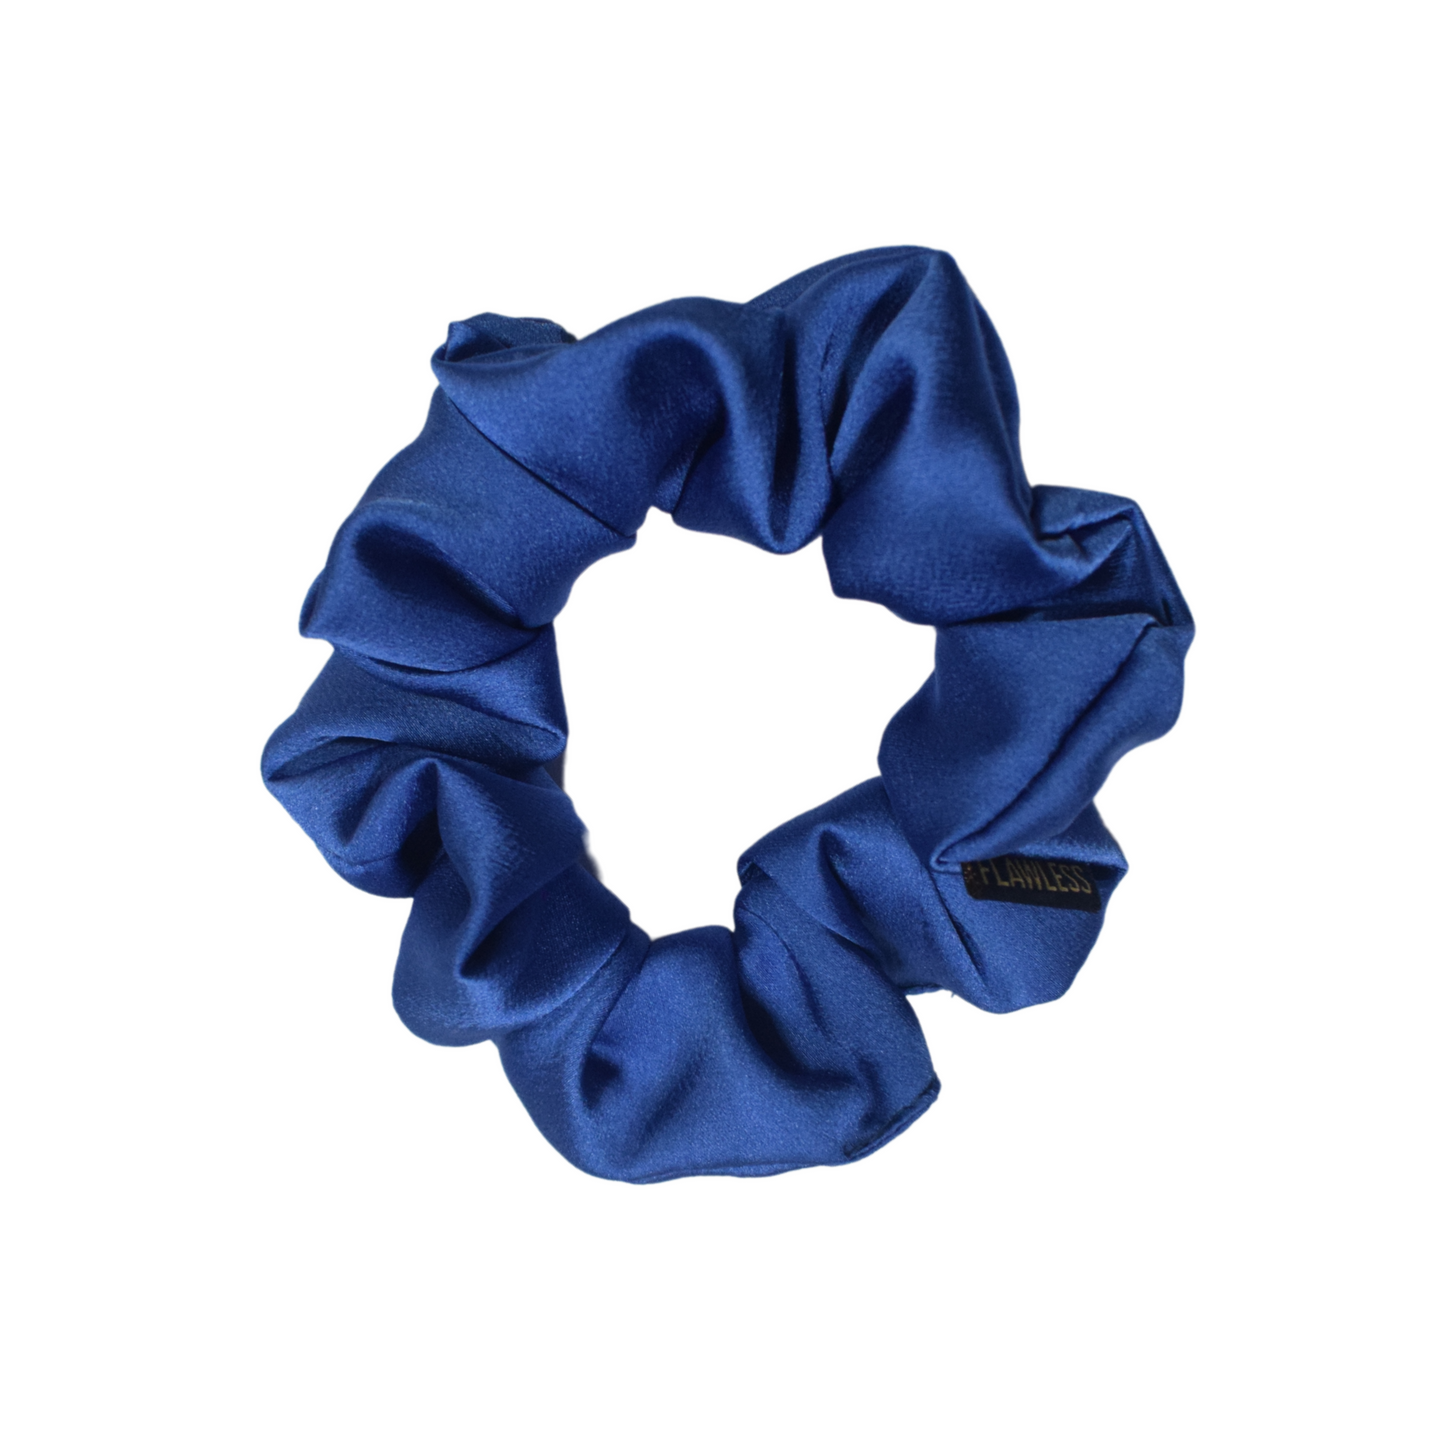 Flawless Blue Satin scrunchies set for women Girls Being Flawless